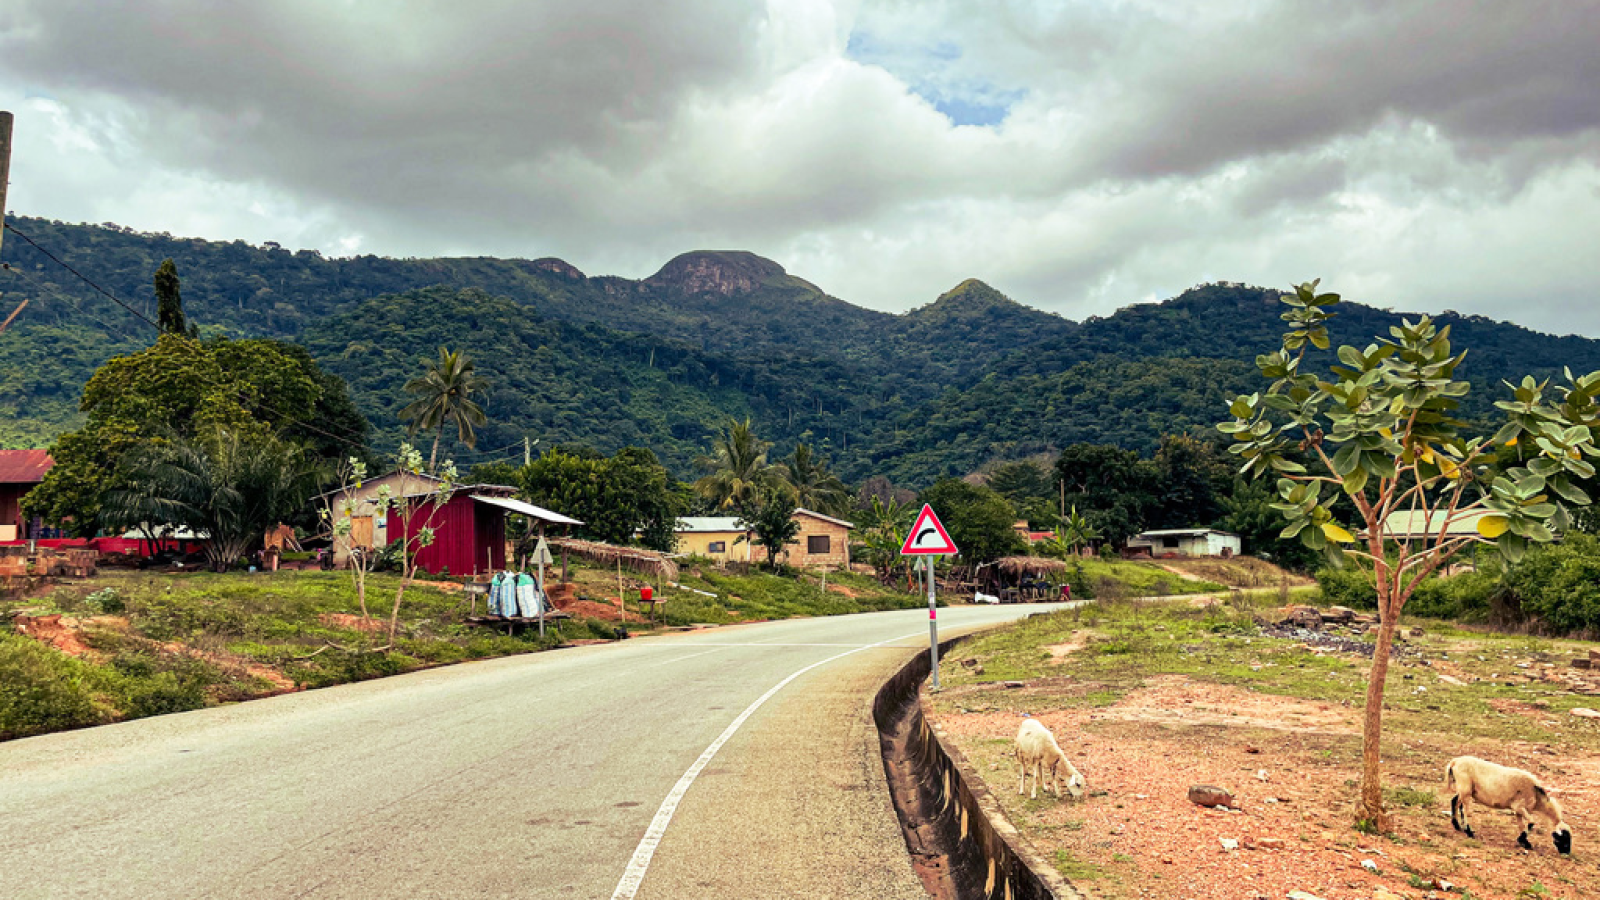 A road curving around a bend with green mountains in the background and red houses along the road